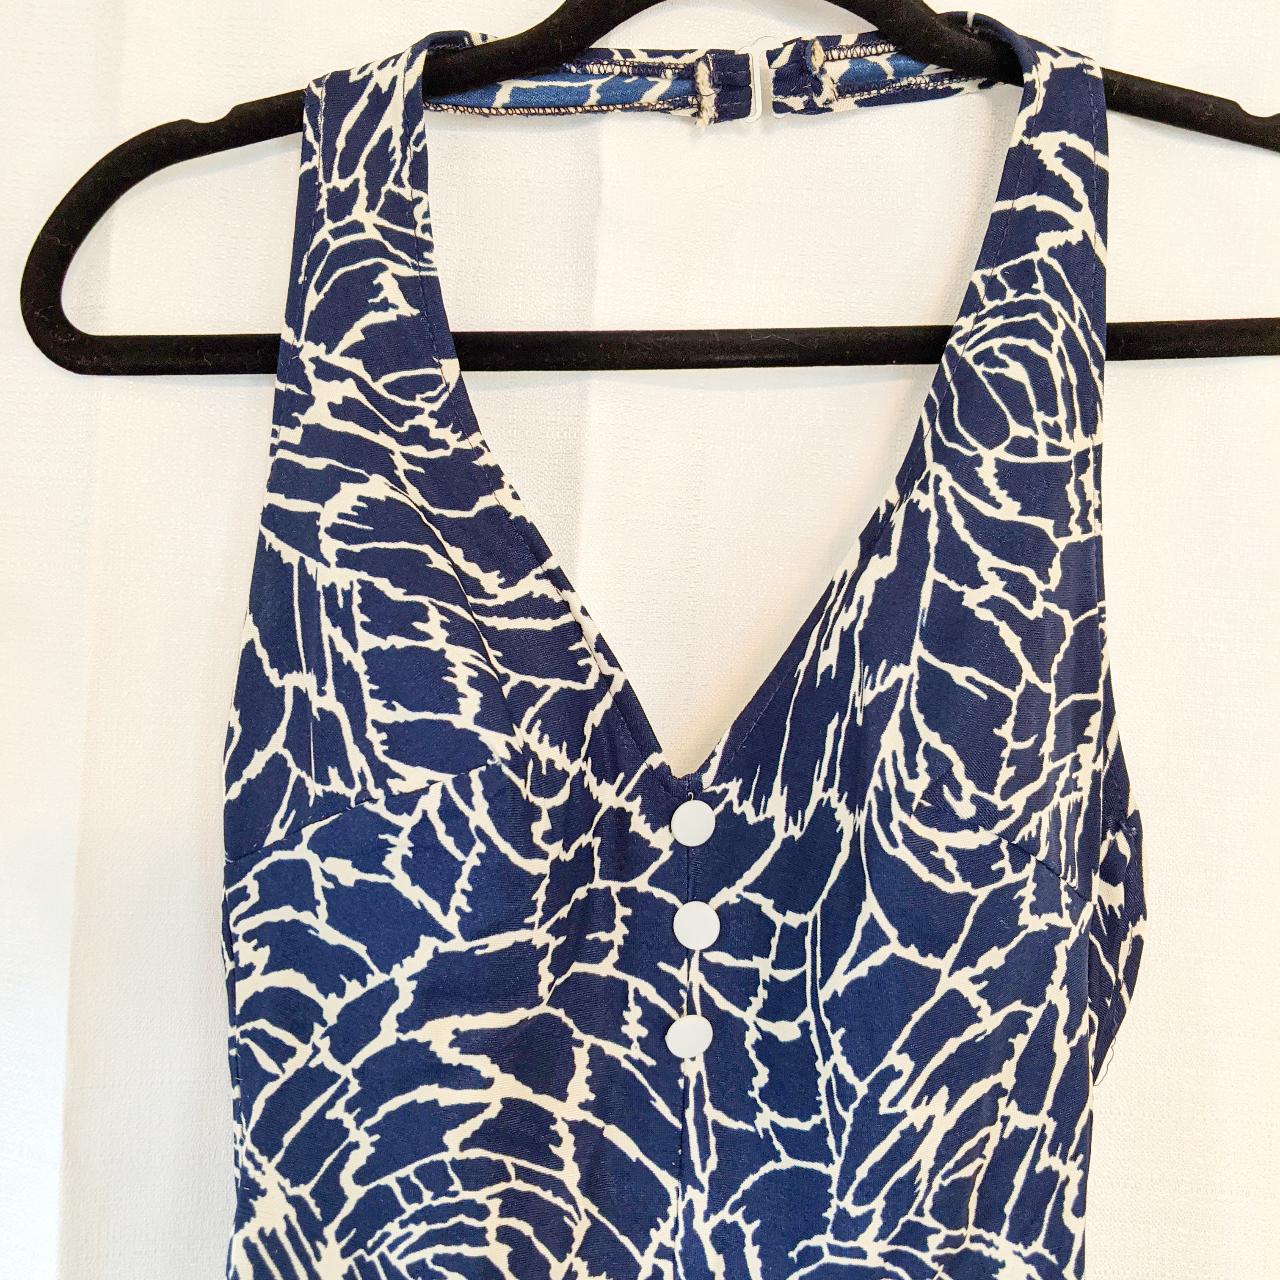 Sears Women's Blue and White Bodysuit (4)